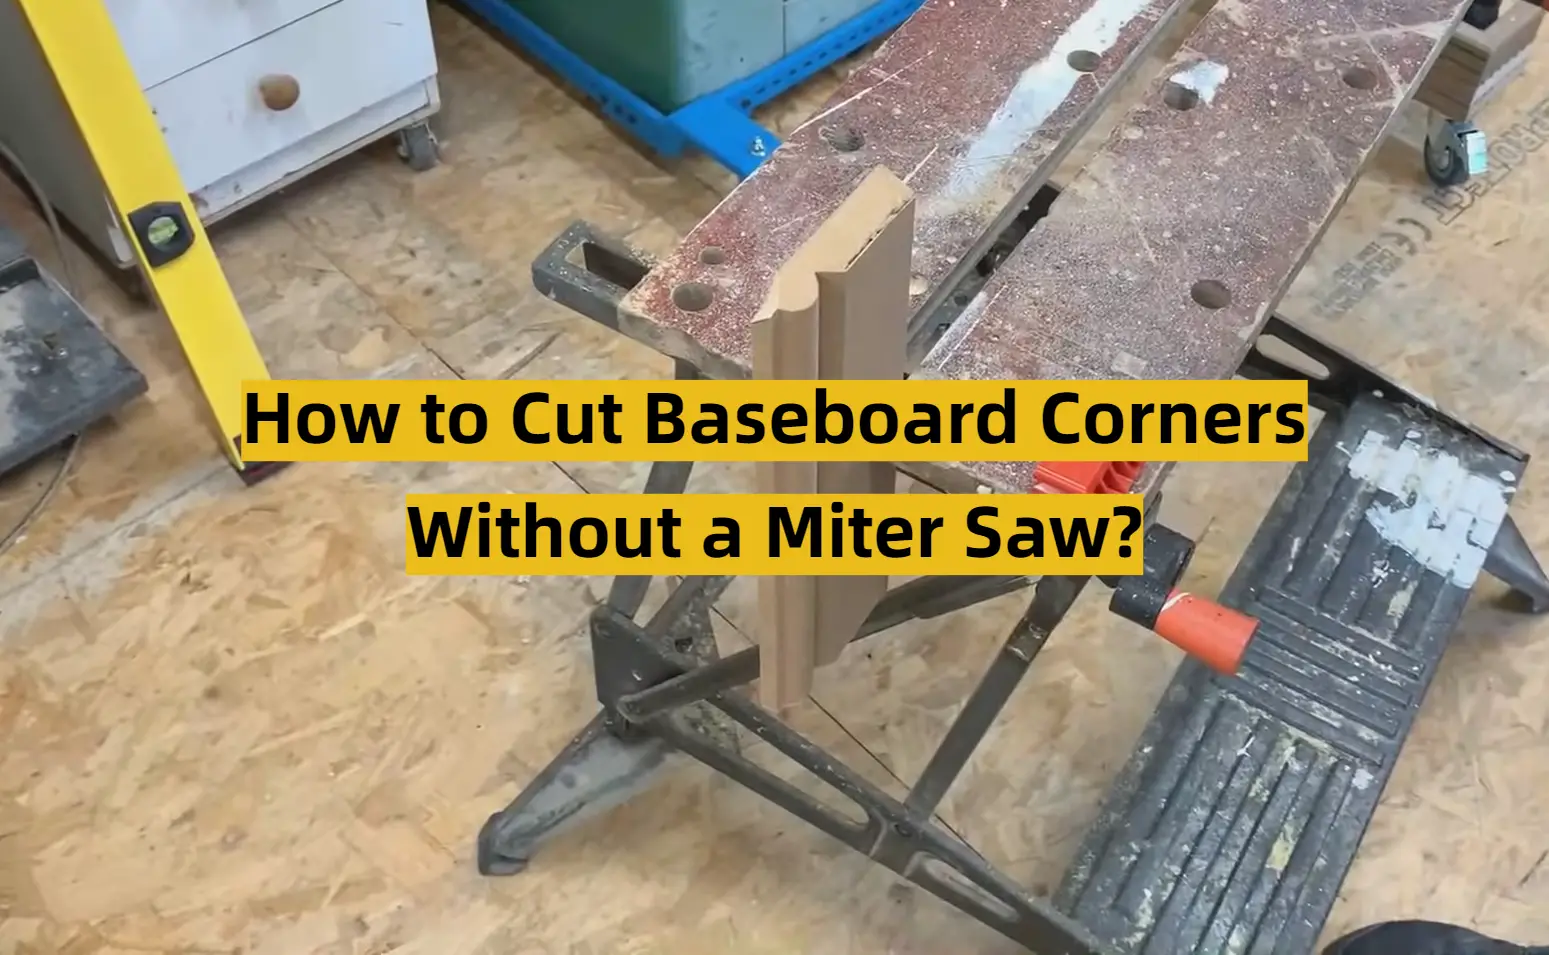 How to Cut Baseboard Corners Without a Miter Saw?